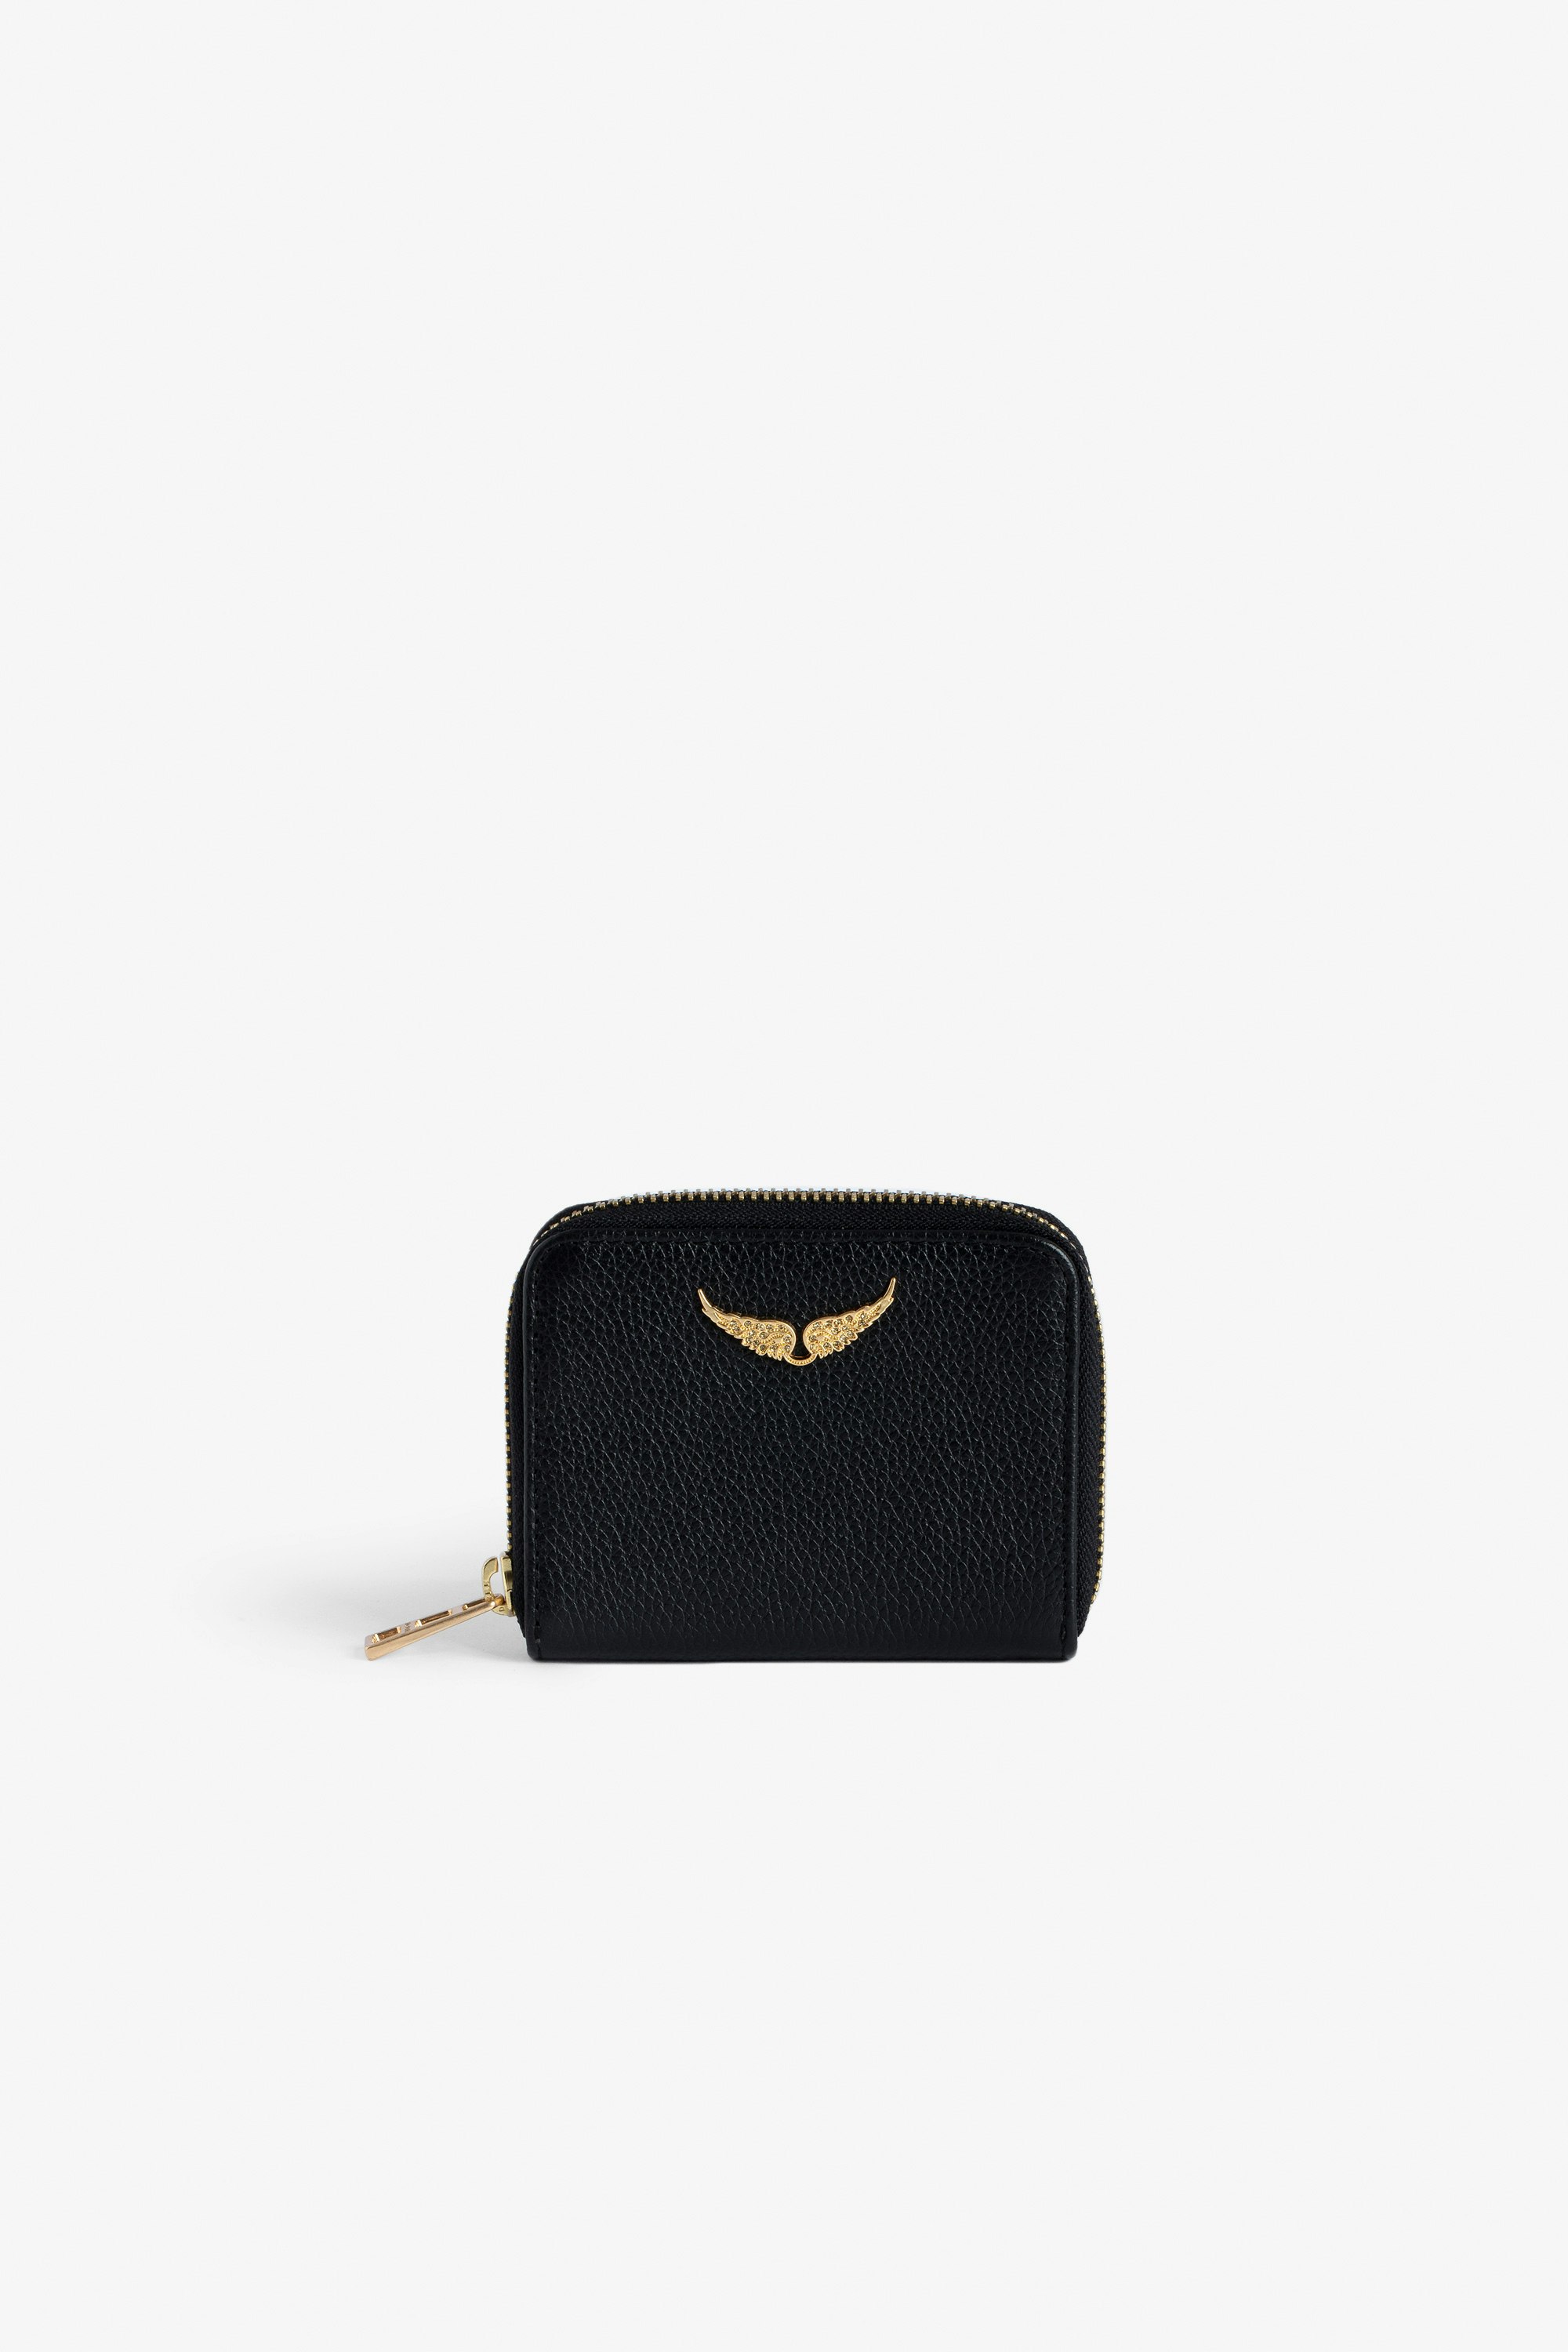 Mini ZV Coin 財布 - Women’s black grained leather wallet with gold-tone diamanté wings charm.